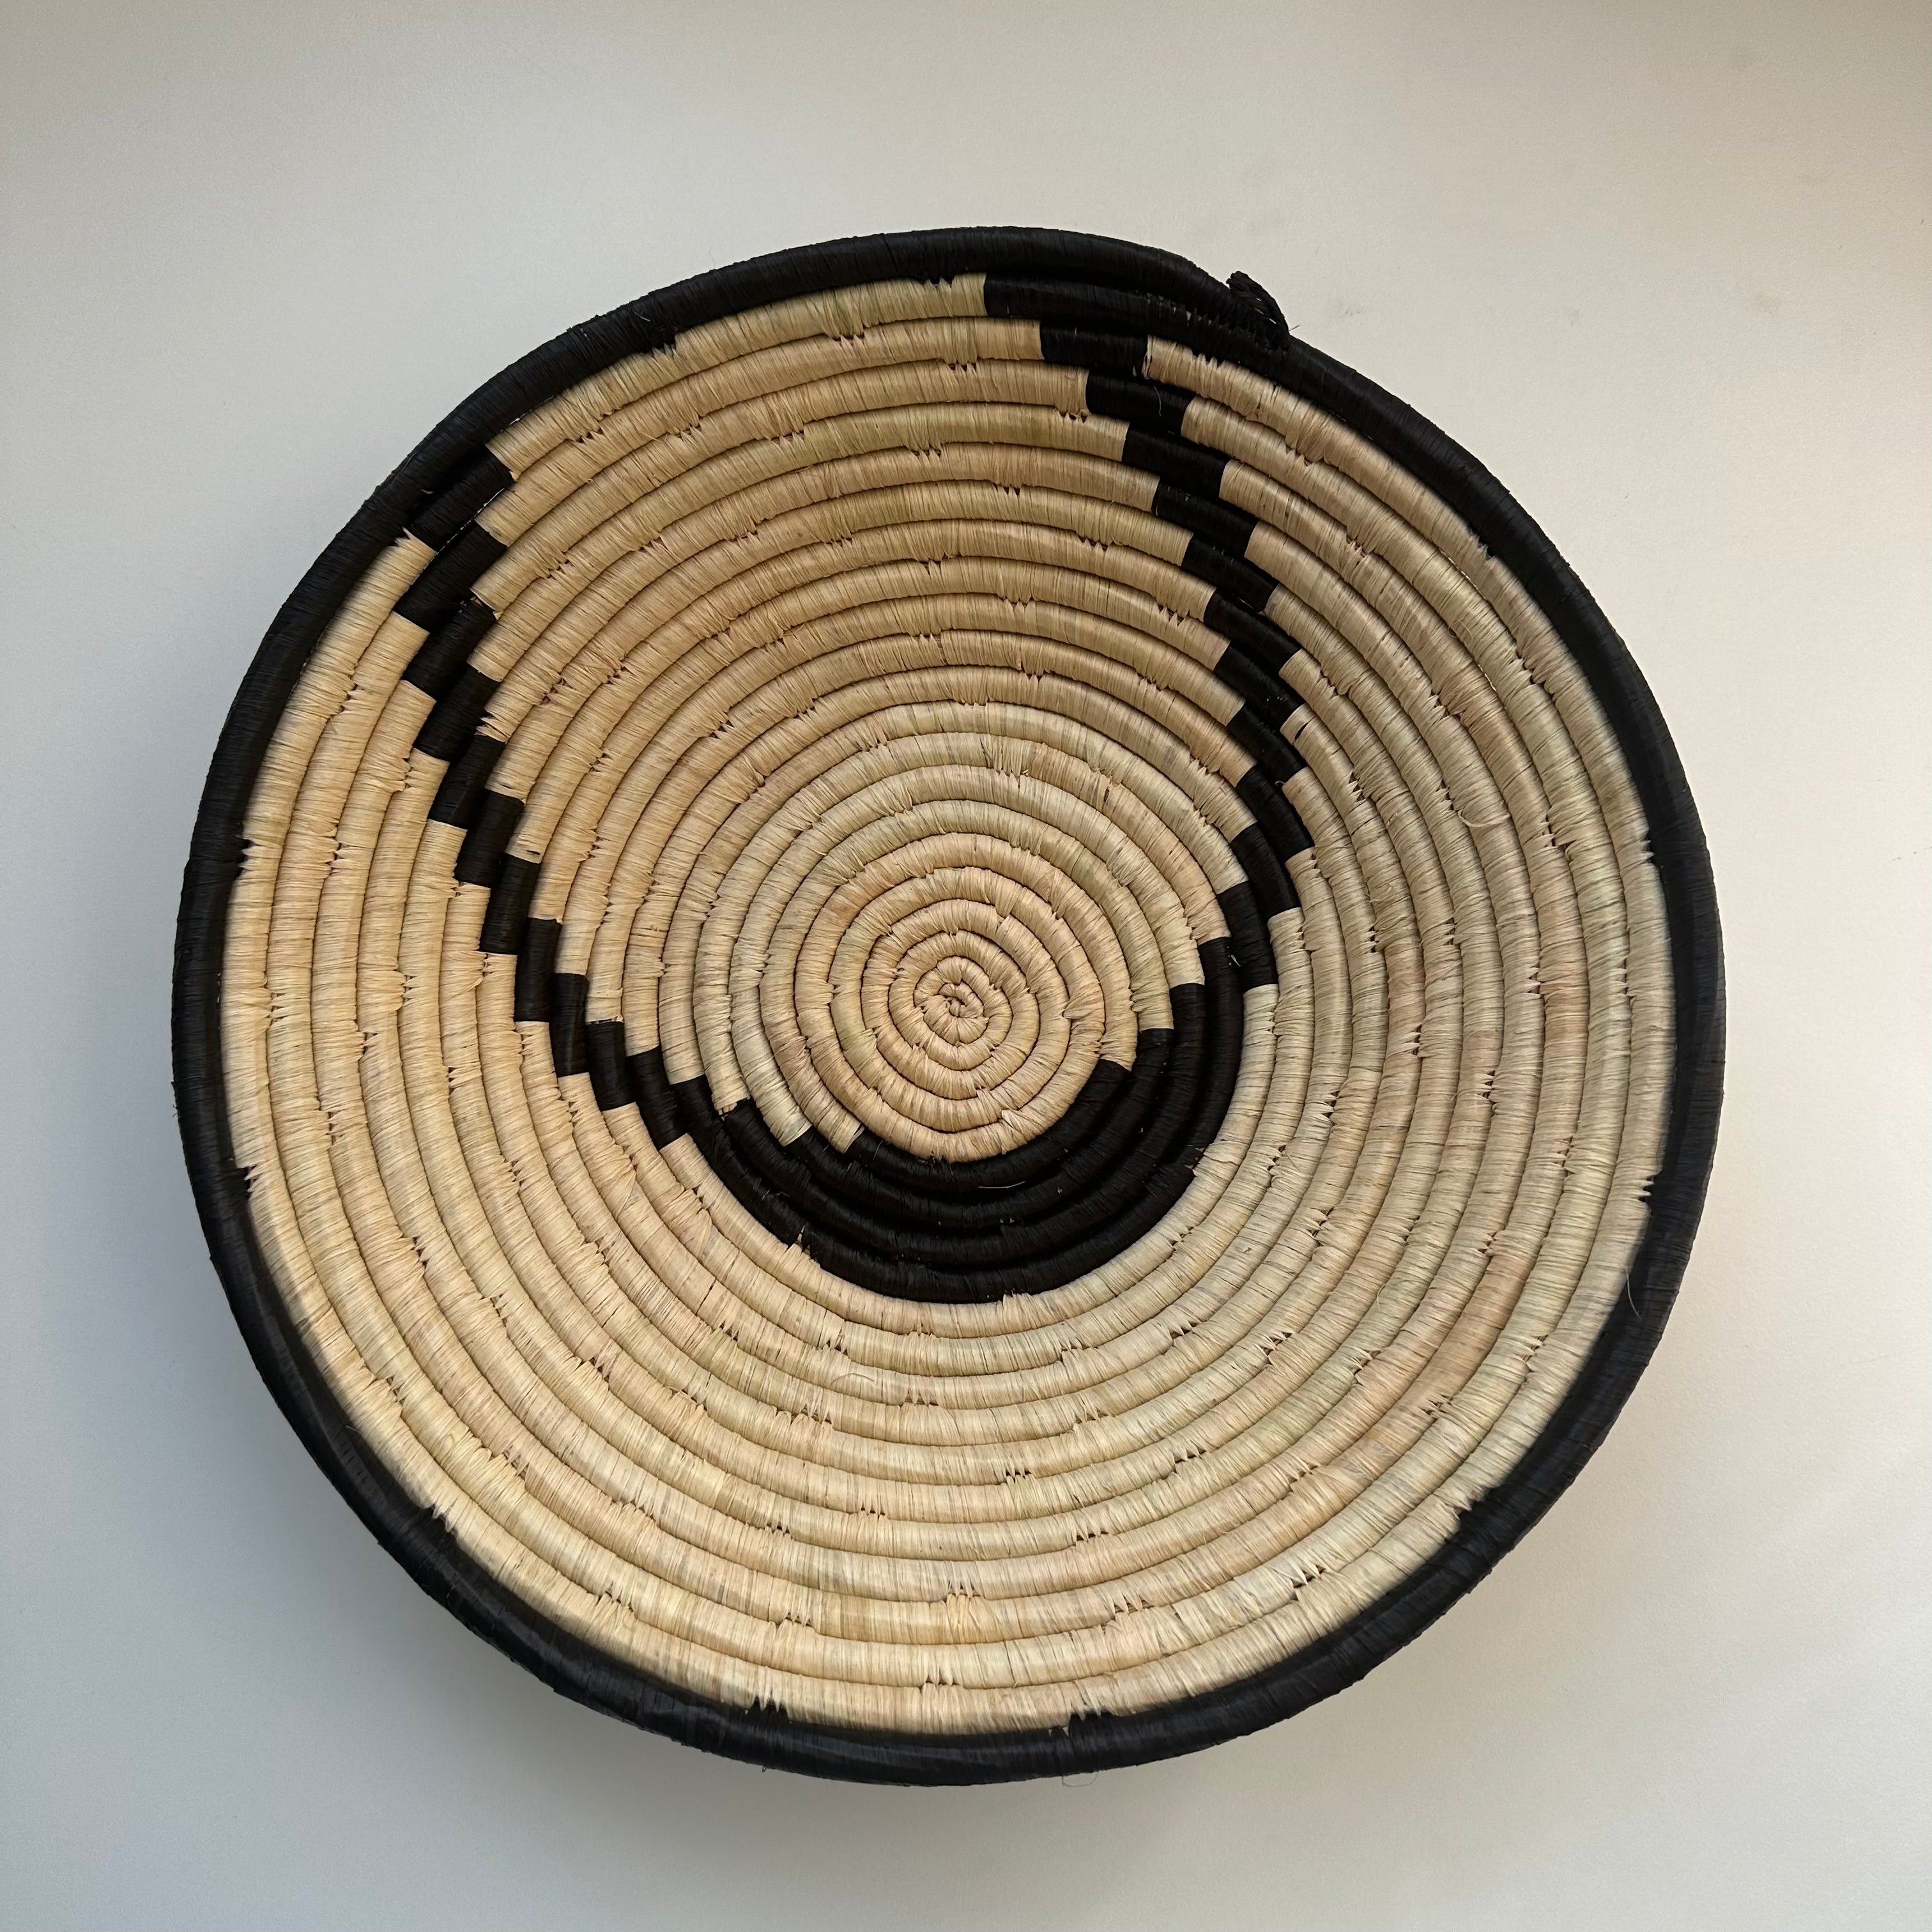 The display of black and natural color woven bowl